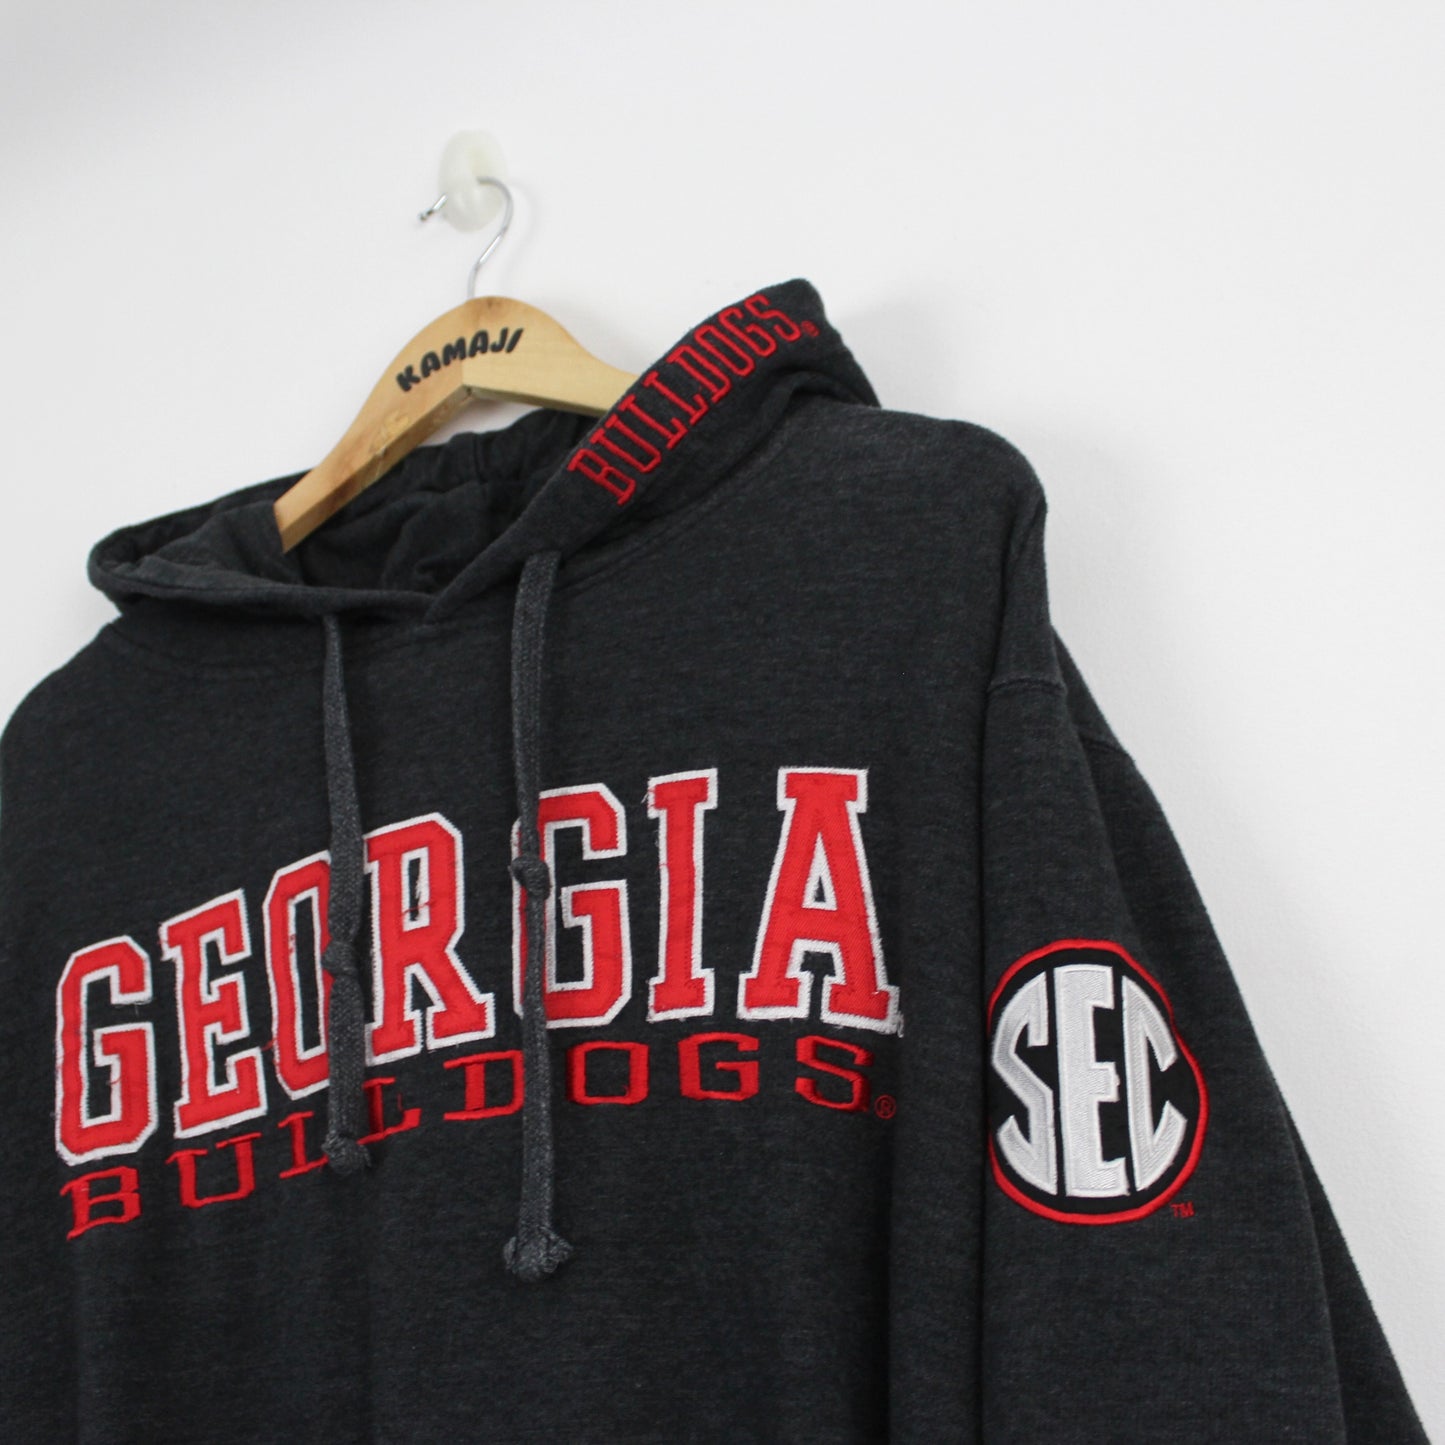 Grey College Pullover Hoodie Georgia Bulldogs Embroidery (M)